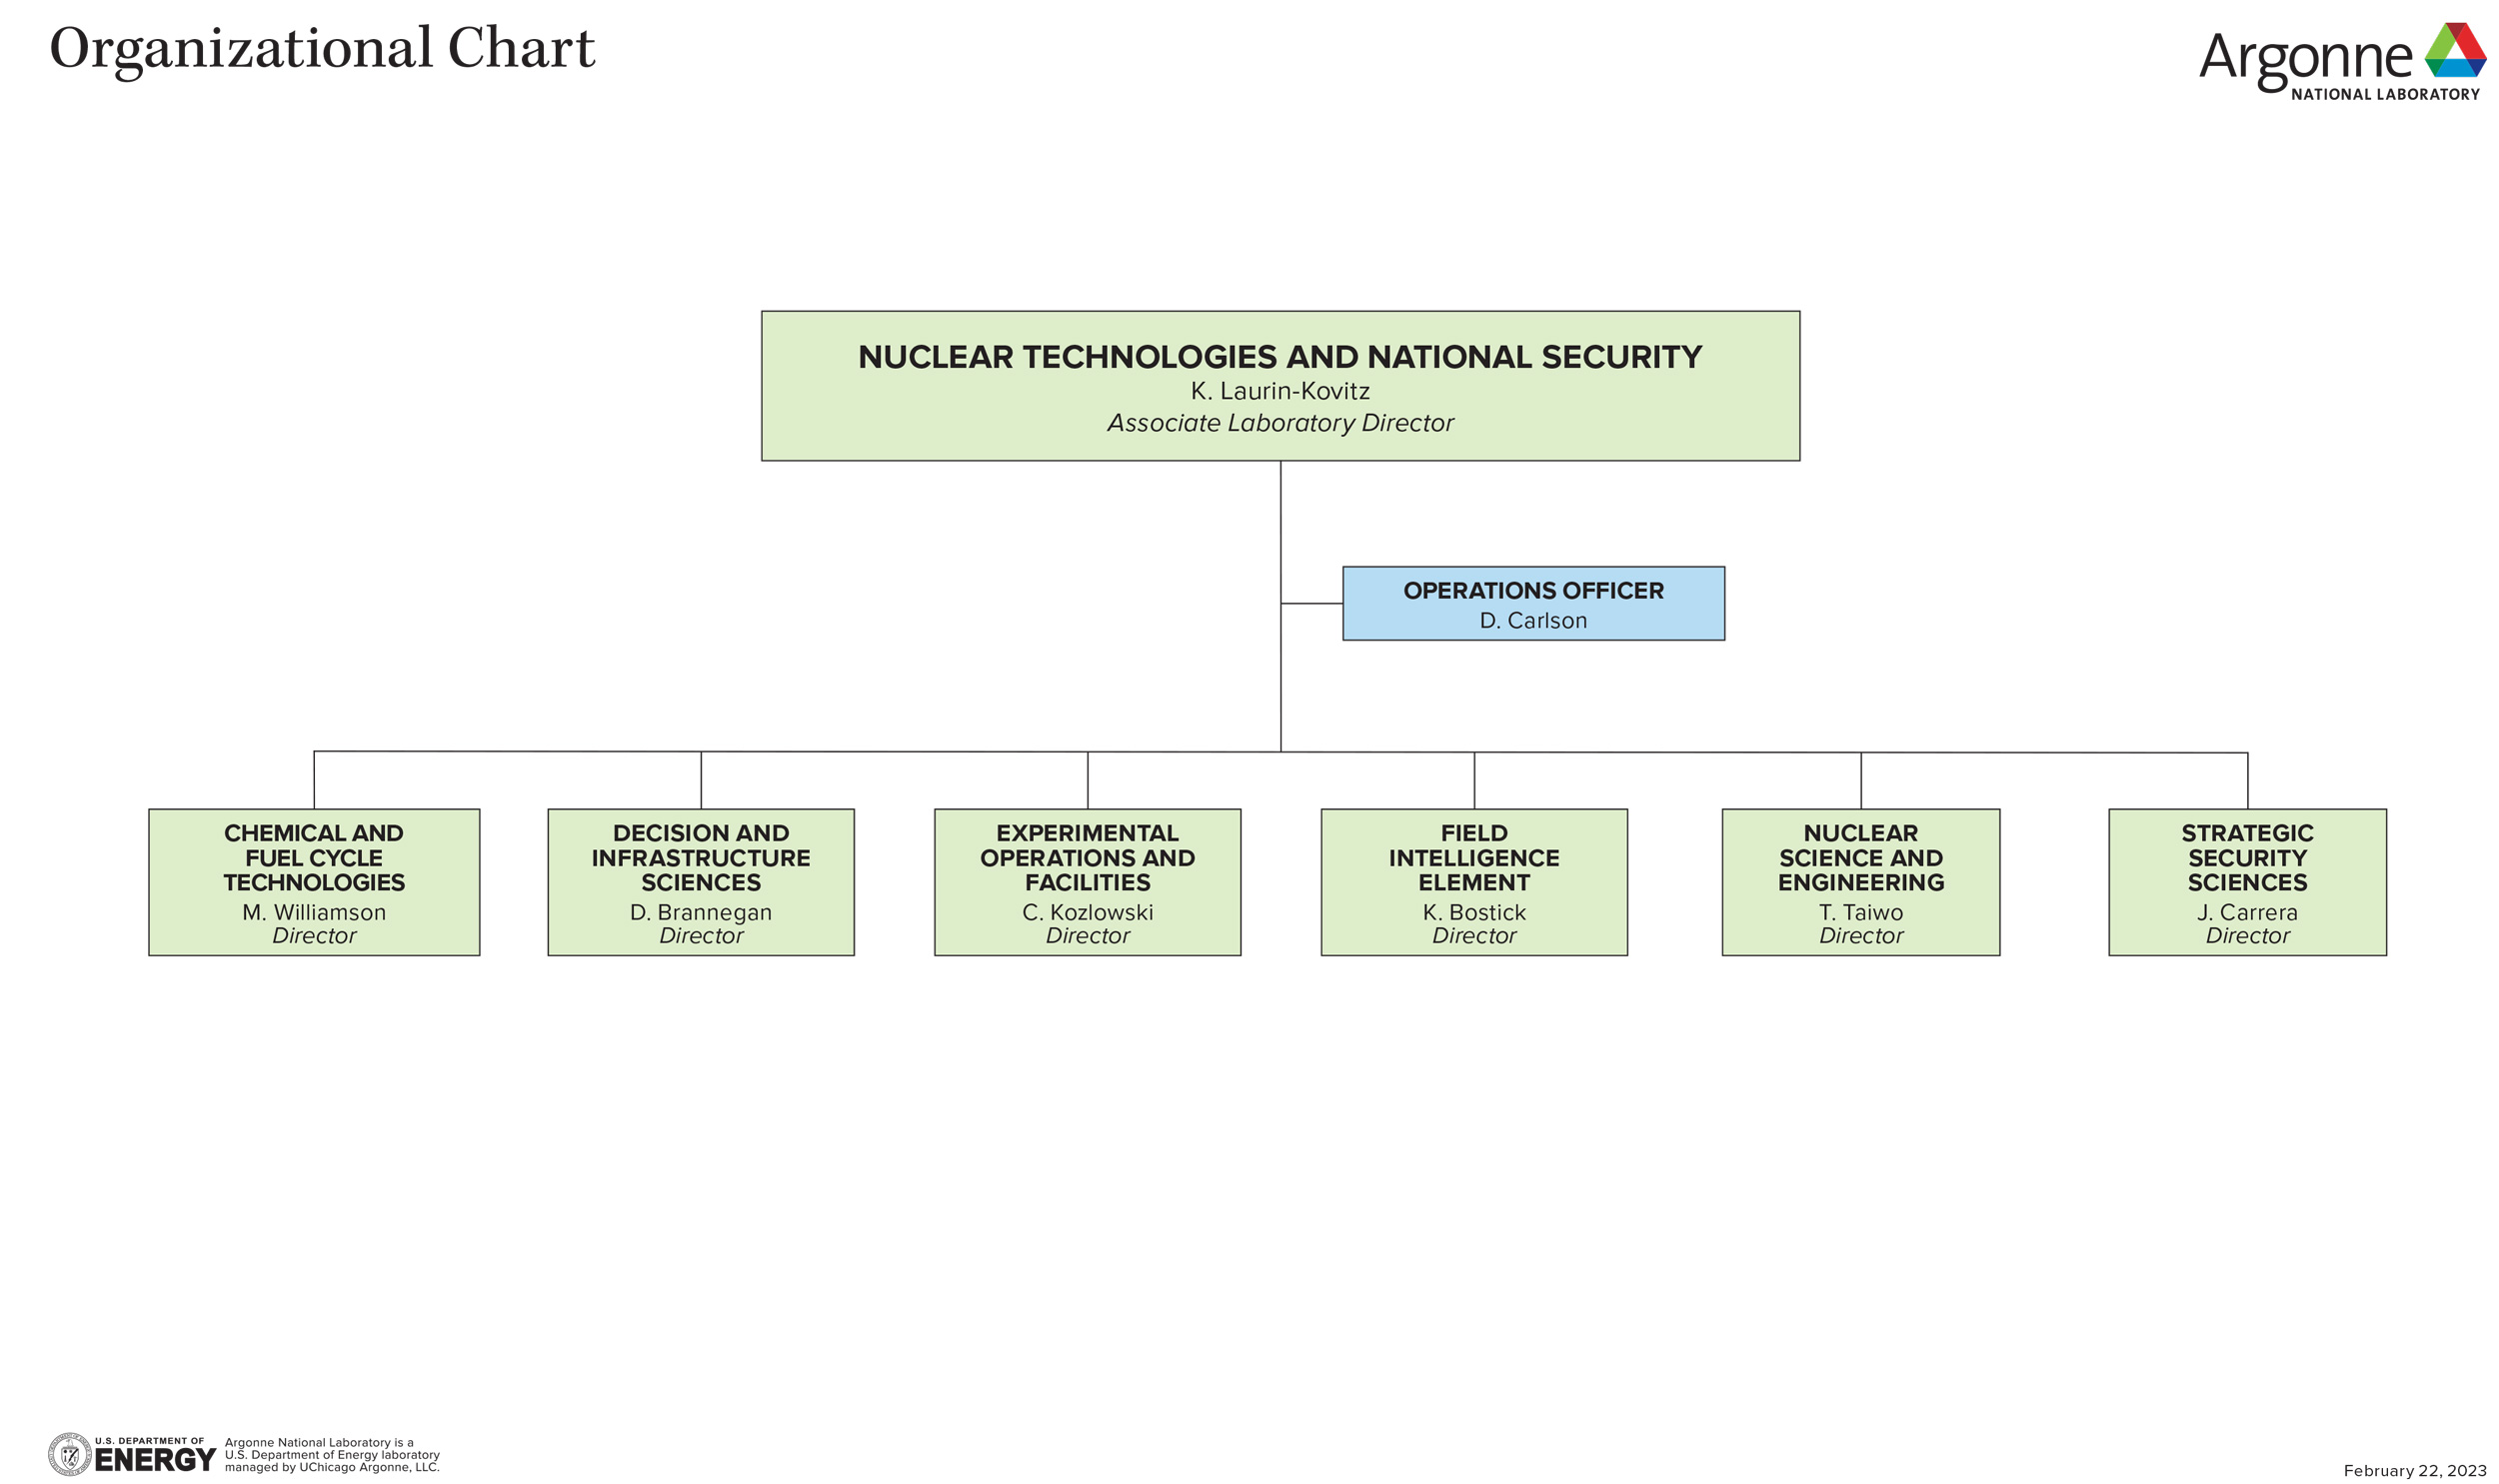 Organization chart of the Argonne NTNS directorate